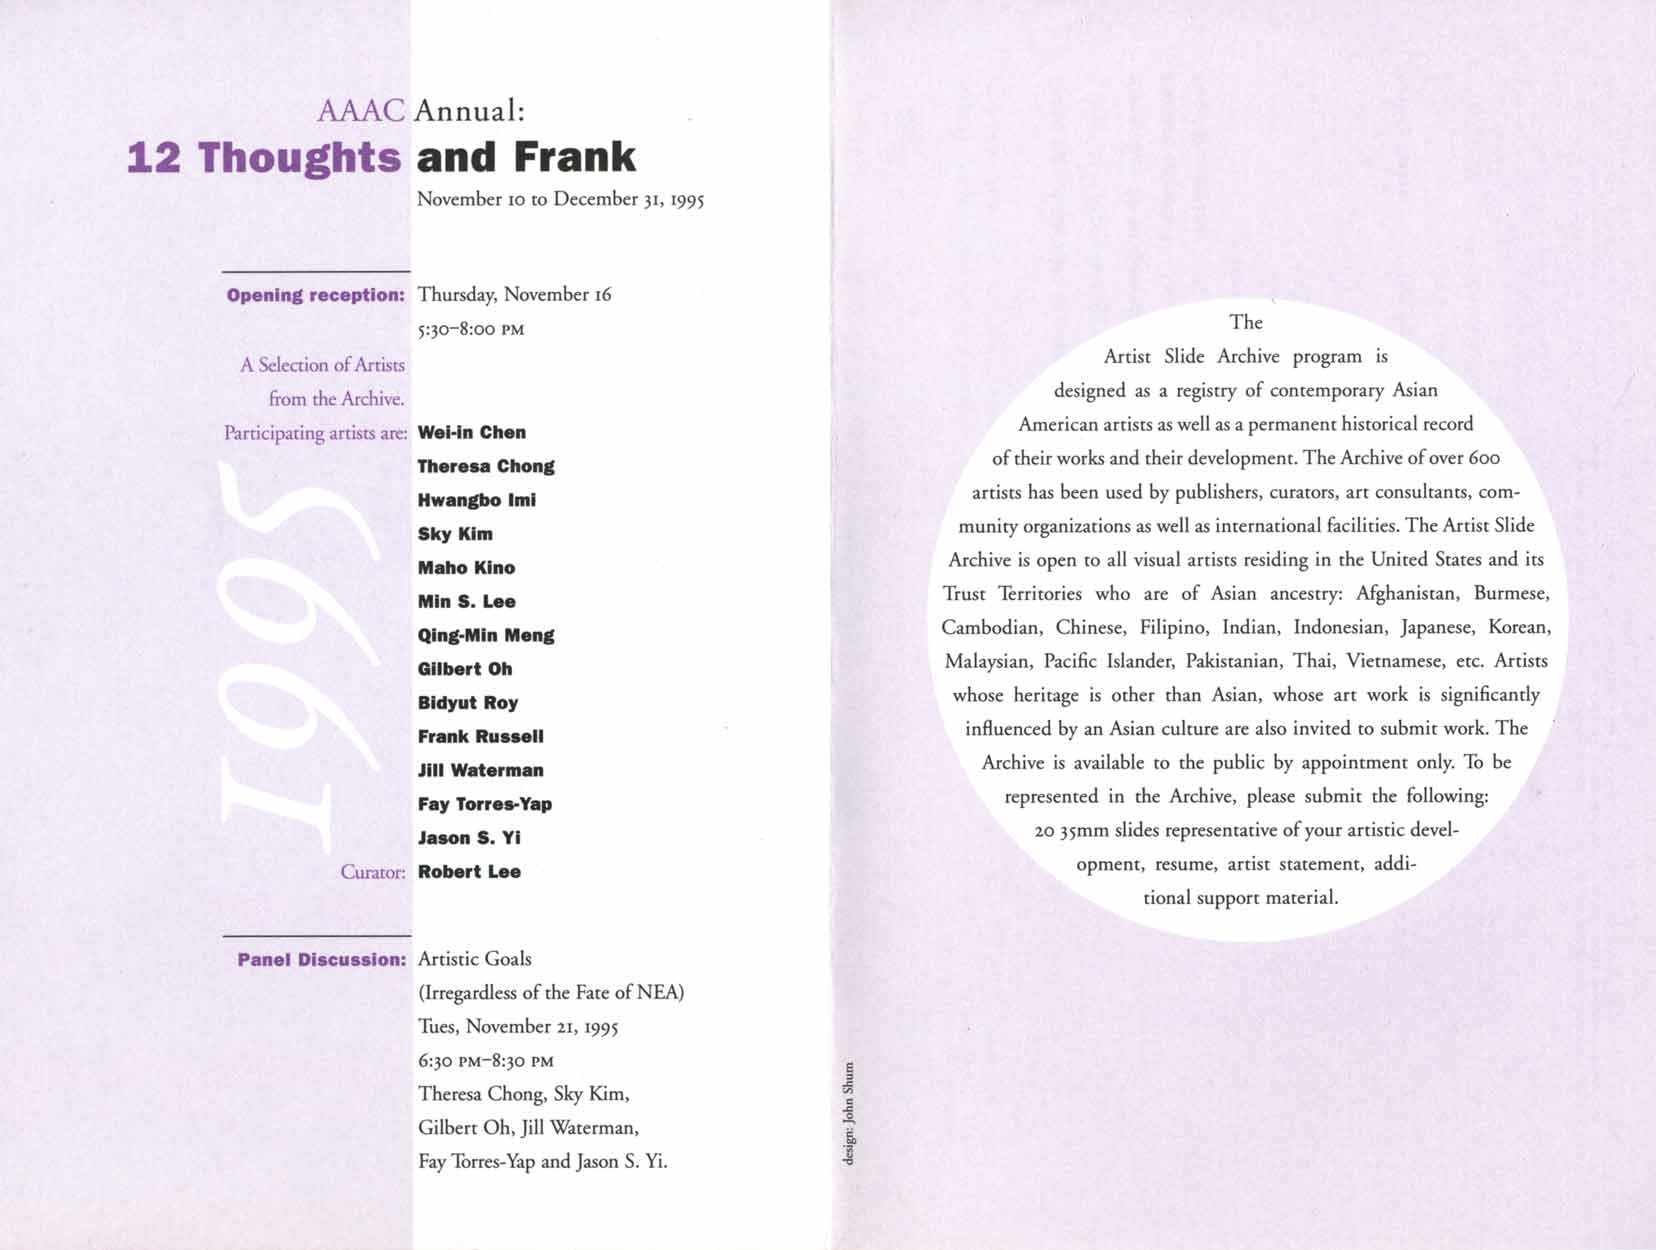 12 Thoughts and Frank, flyer, pg 2